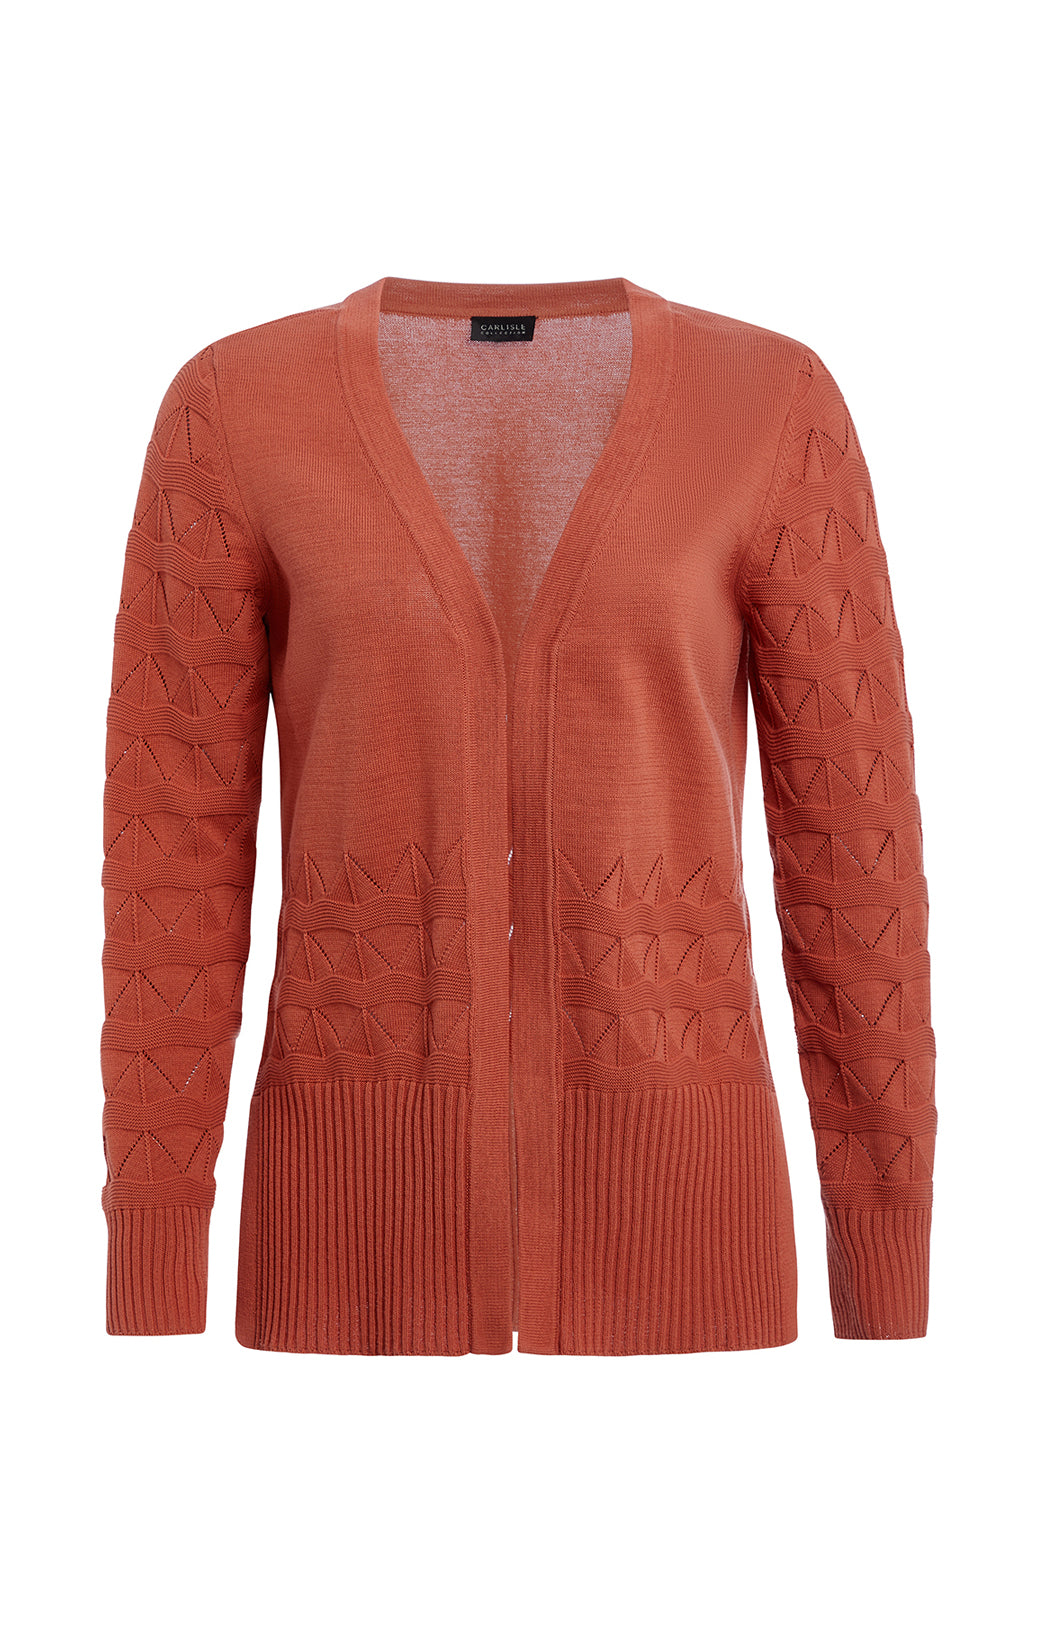 Patio - Asymmetrical Embroidered Twill Jacket - Product Image